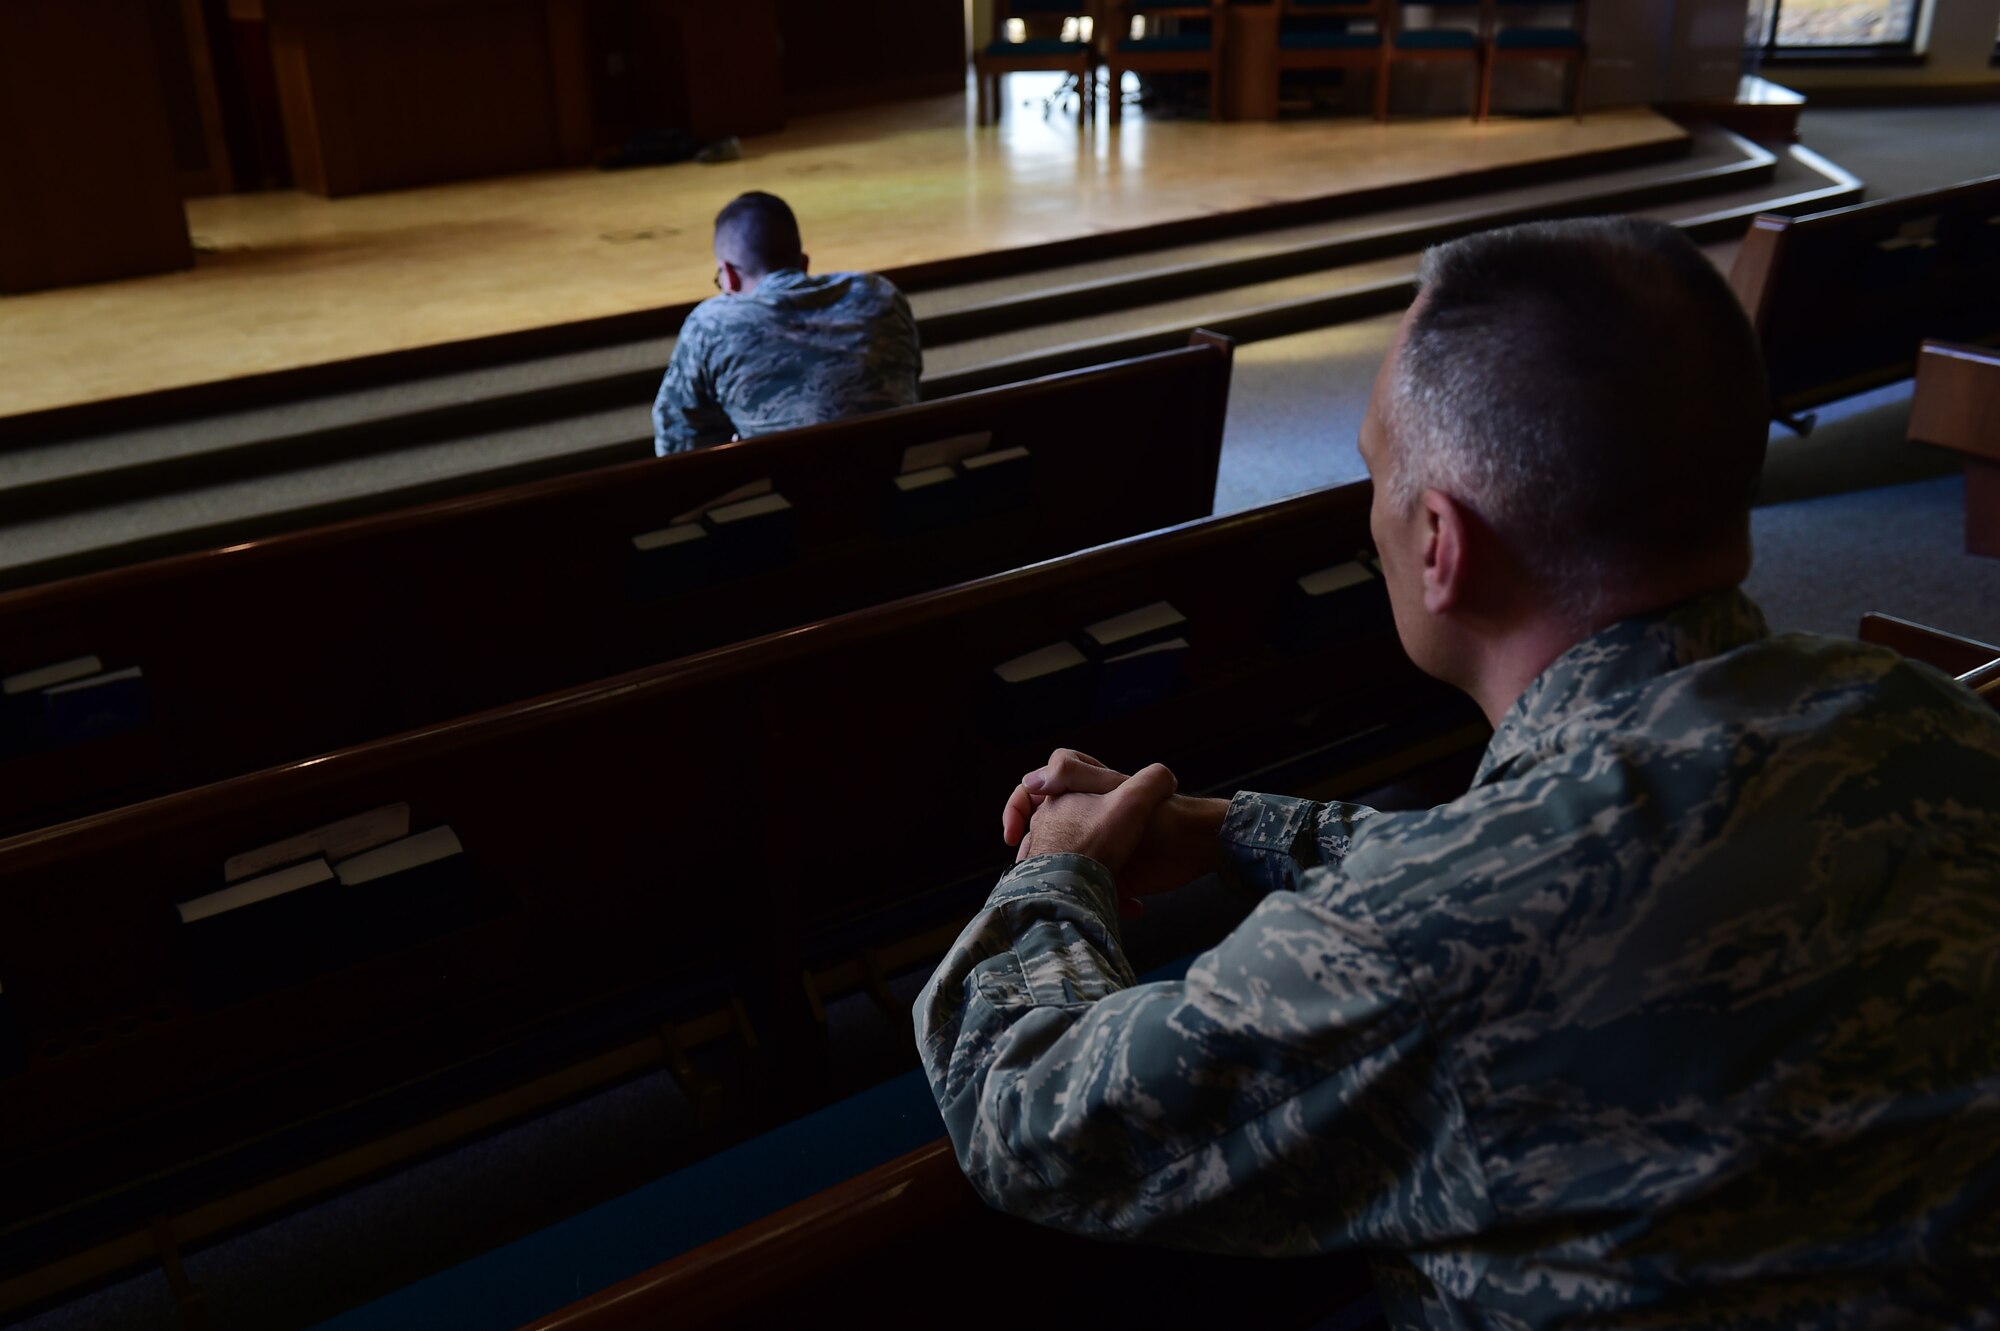 Chaplain (Maj.) Kevin Chelf, 460th Space Wing deputy wing chaplain, and Senior Airman Nicholas Pulkownik, 460th Operations Support Squadron staff instructor, take a moment of reflection Feb. 9, 2017, at the chapel on Buckley Air Force Base, Colo. The chapel is a spiritual outlet that focuses on the individual needs of each Airman. (U.S. Air Force photo by Airman 1st Class Gabrielle Spradling/Released)